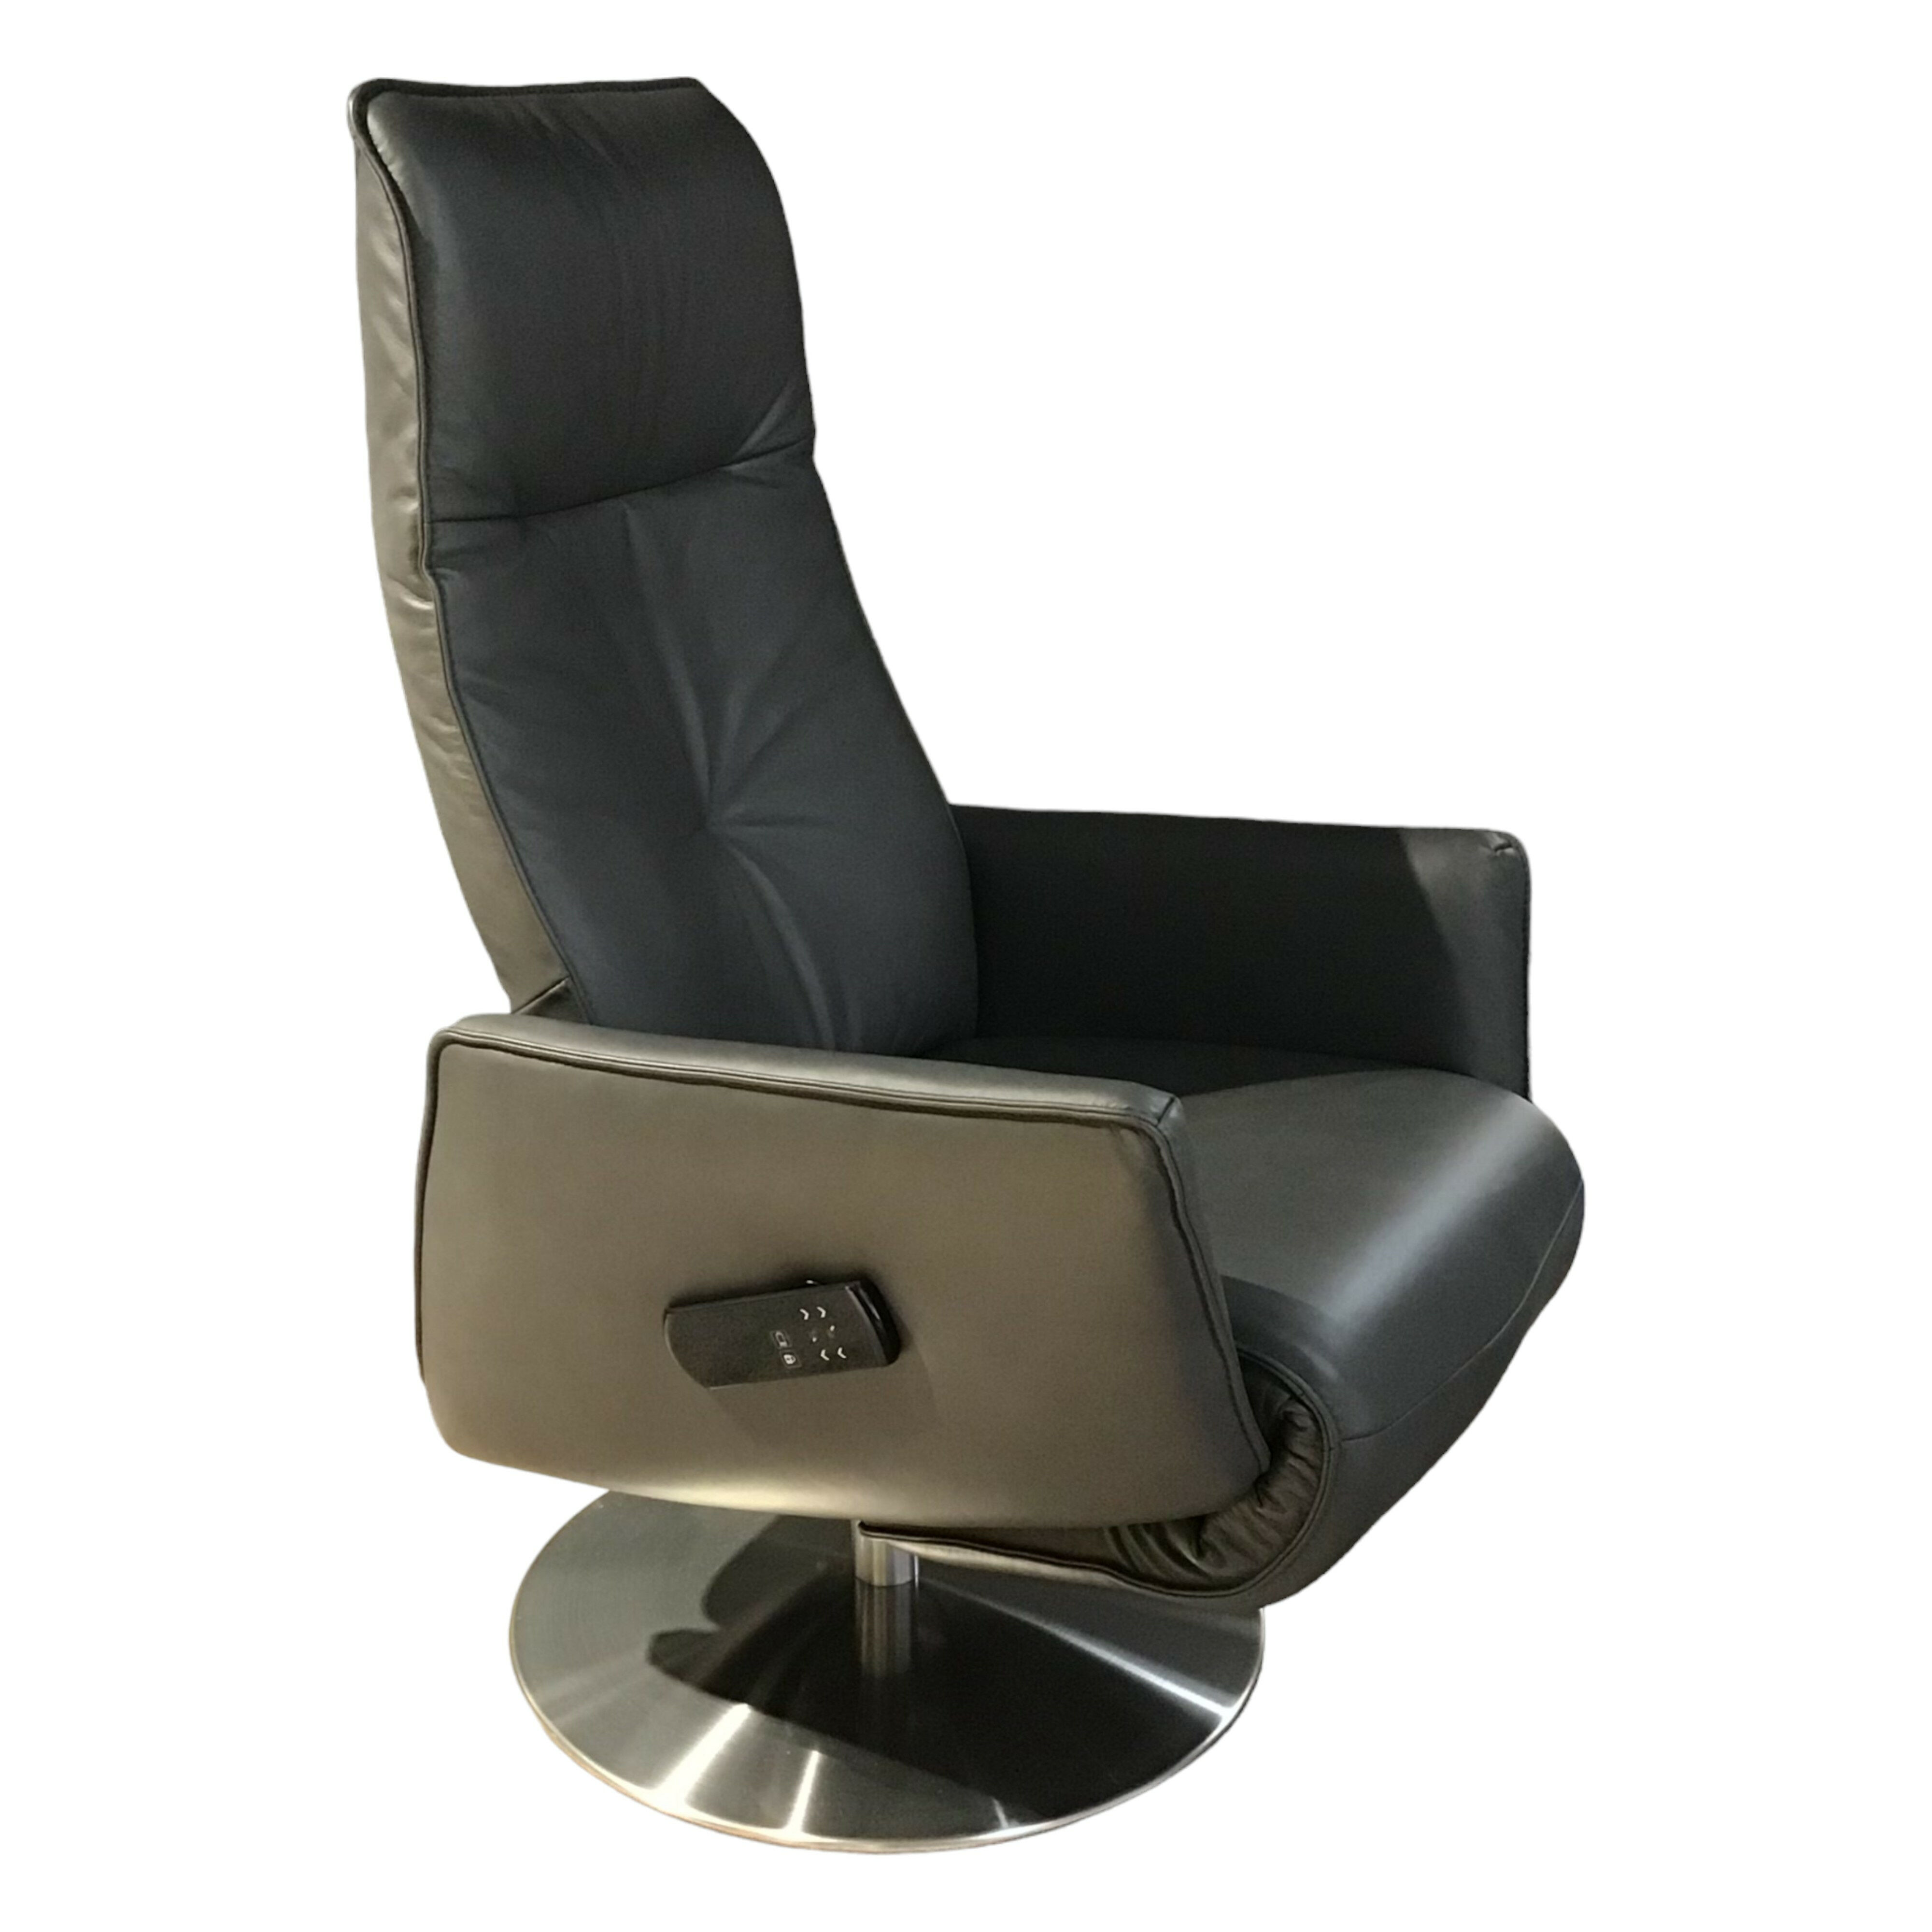 Relaxsessel Horgau S-Lounger L Leder Moor Grau mit Relaxfunktion